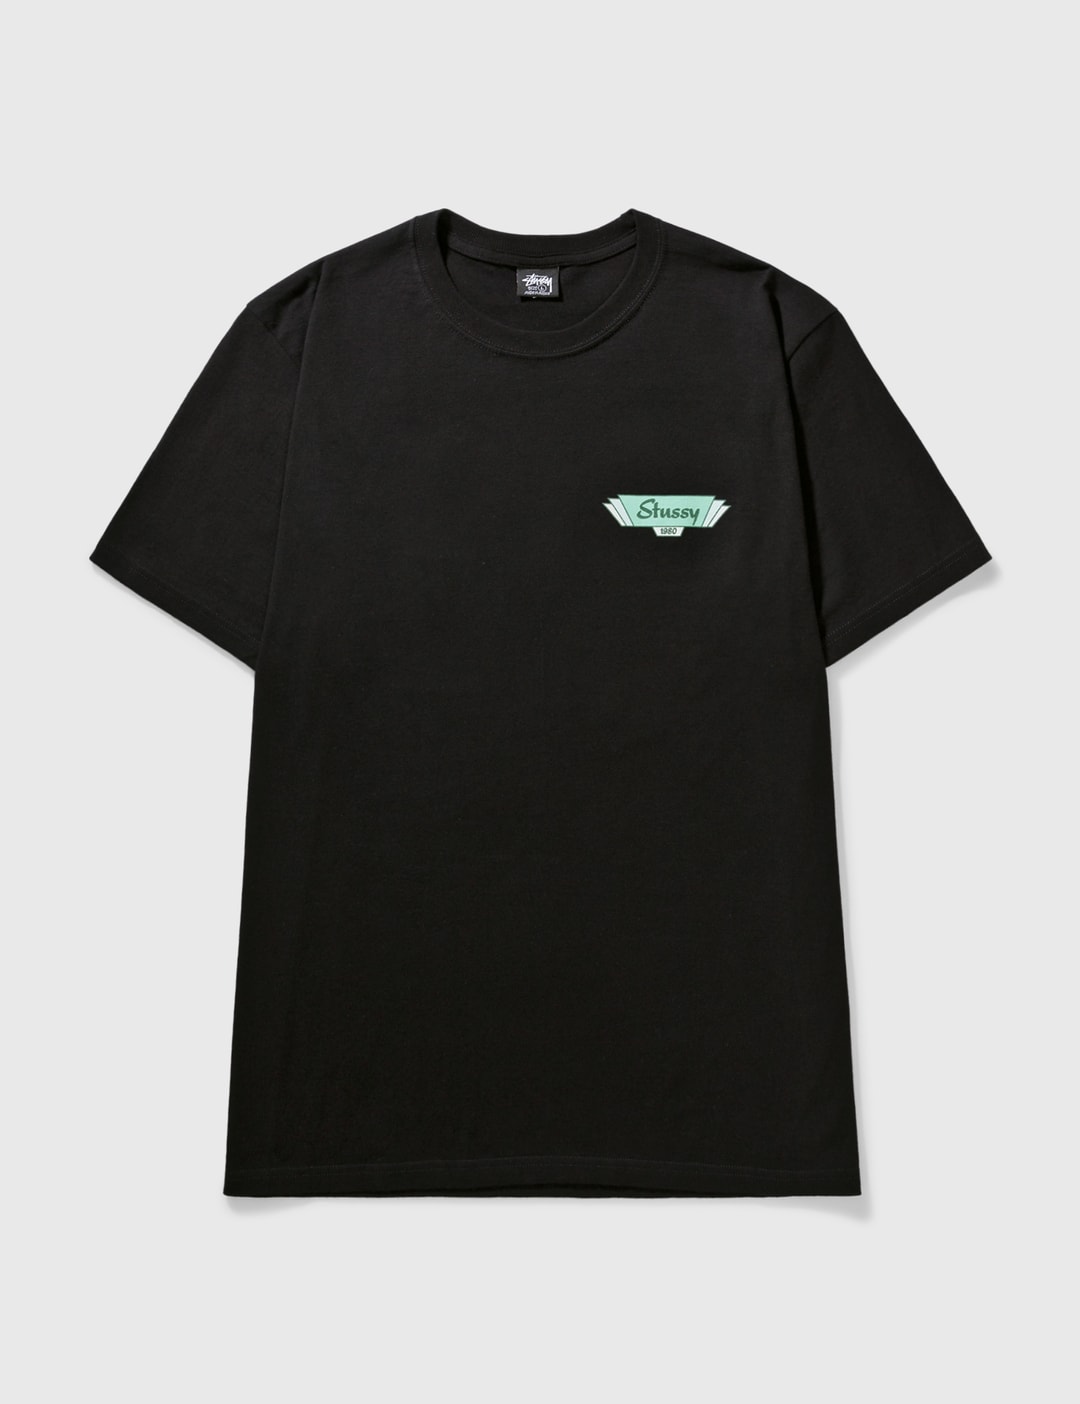 Stüssy - Palm Springs T-shirt | HBX - Globally Curated Fashion and ...